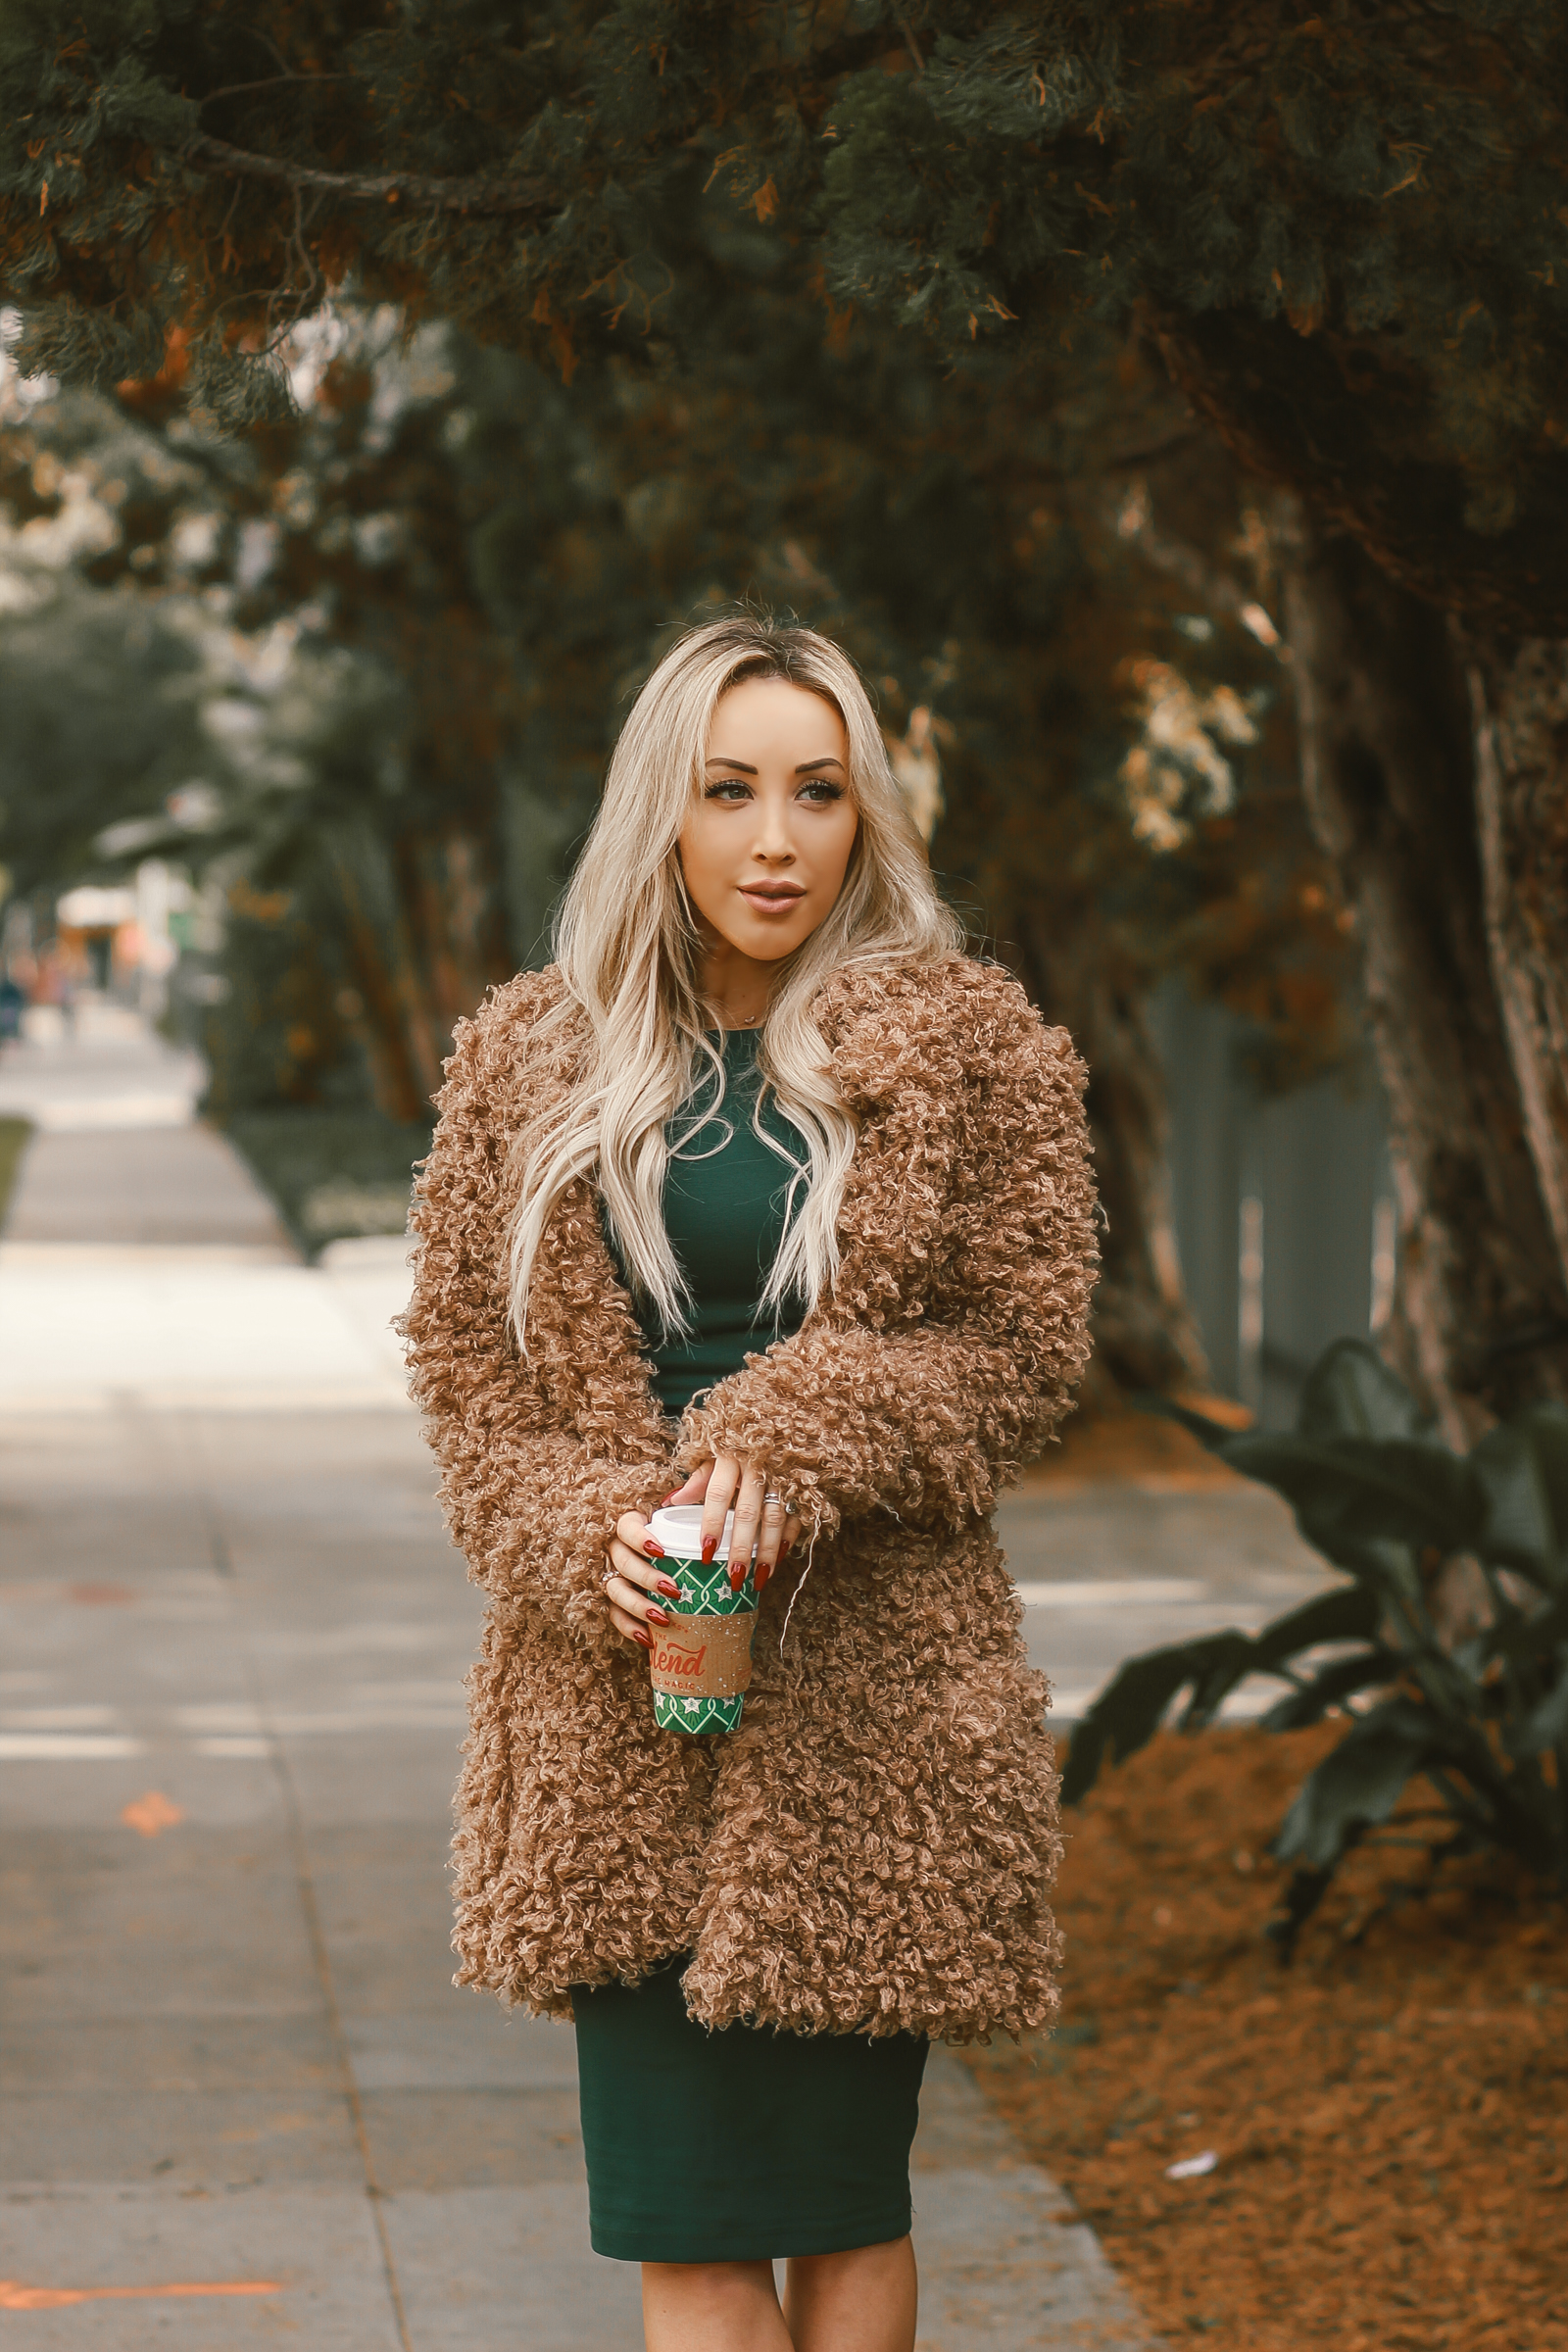 Forest Green Dress | Christmas Outfit Inspo | Holiday Outfit | Holiday Style | Dark Green Dress | Blondie in the City by Hayley Larue